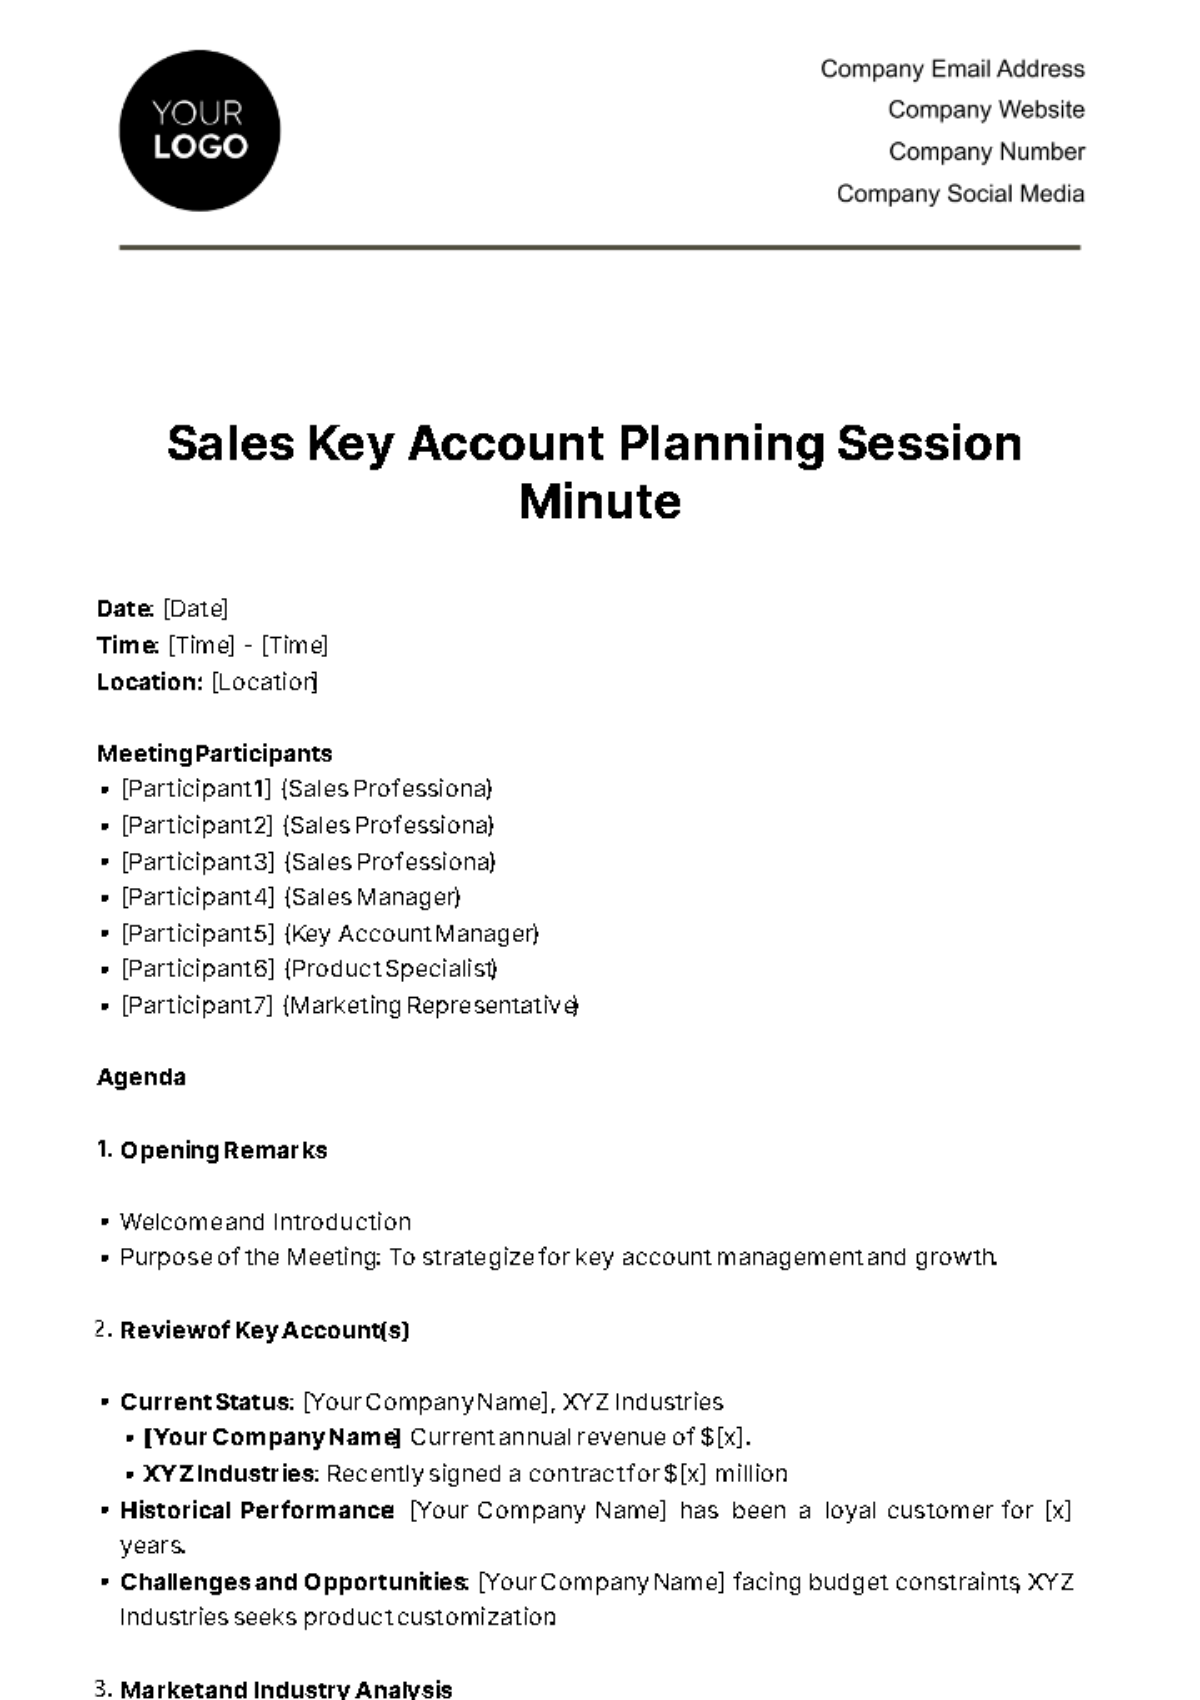 Sales Key Account Planning Session Minute Template